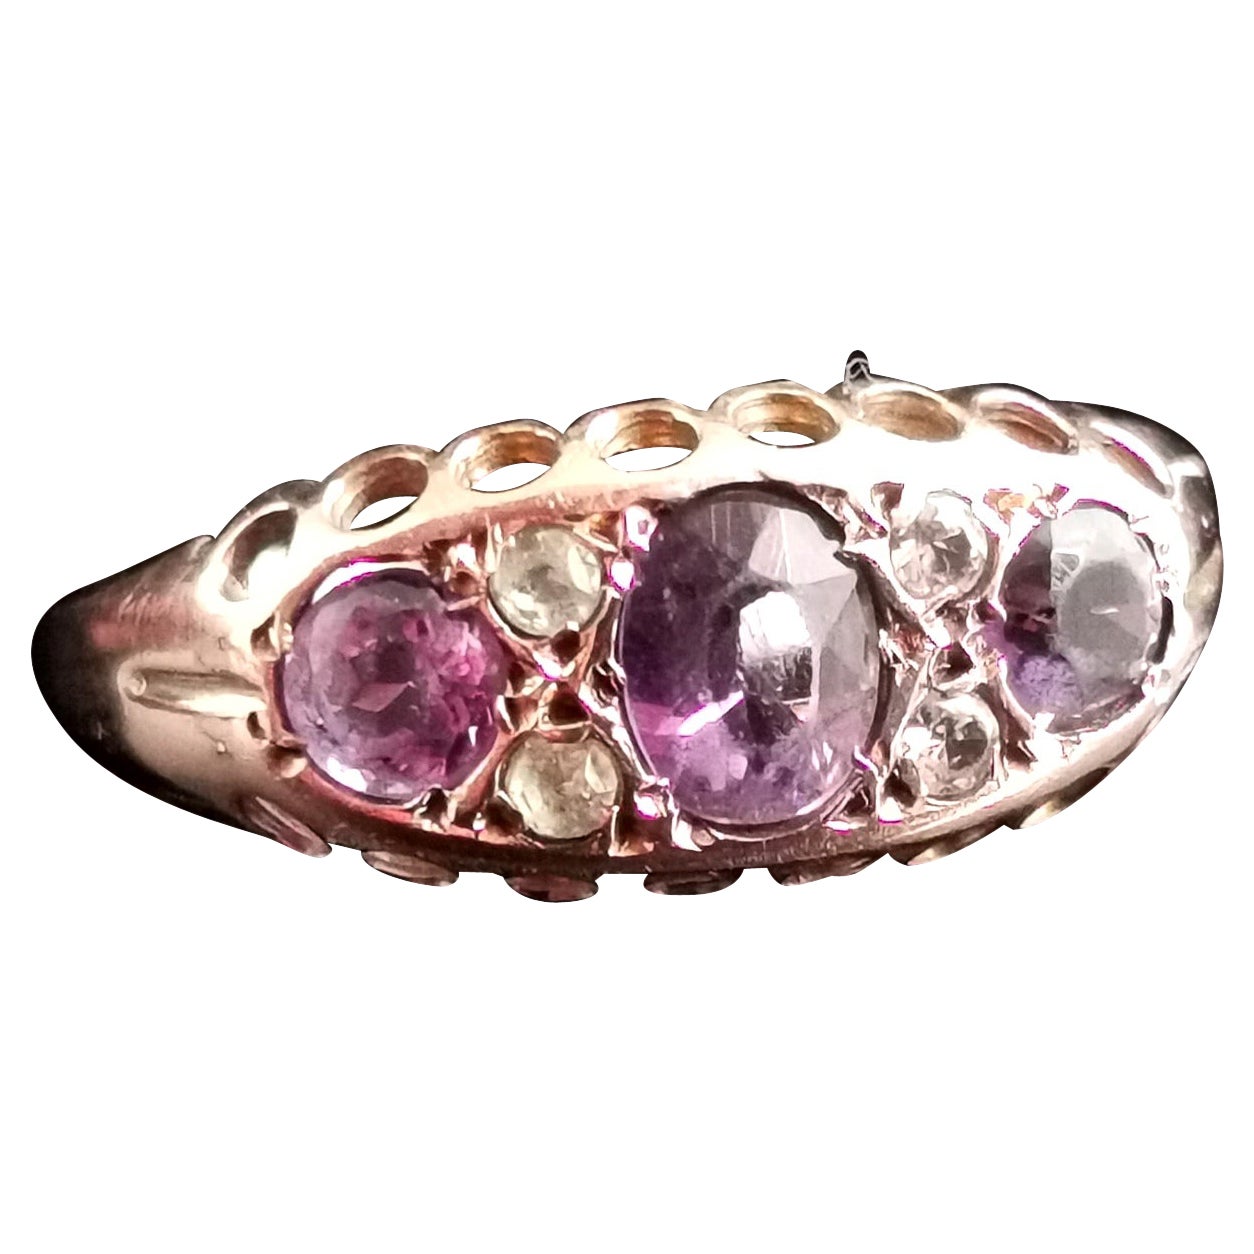 Antique Amethyst and Paste Stone Ring, 9 Karat Gold